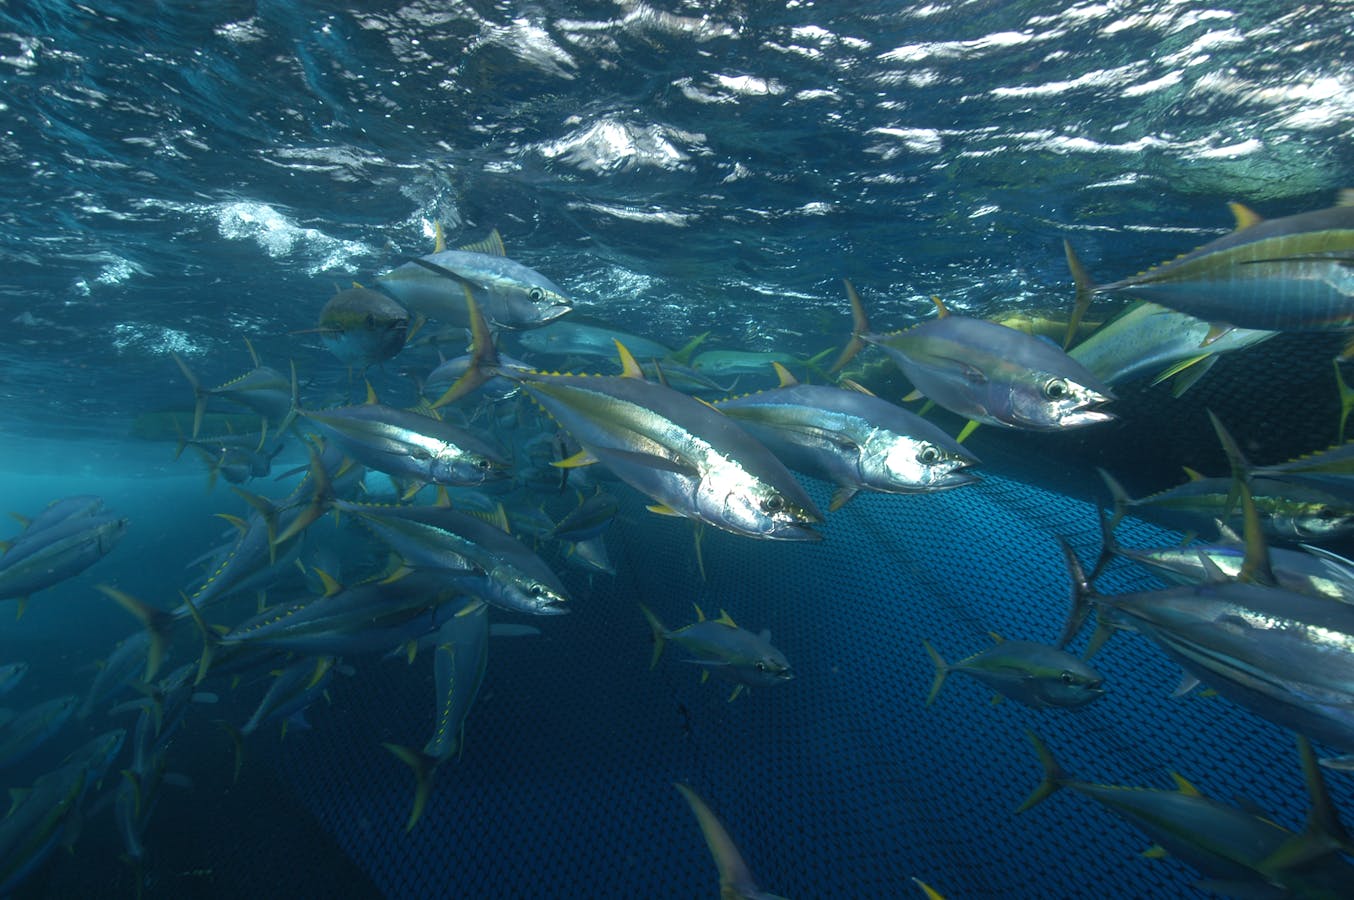 https://ciorg.imgix.net/images/default-source/non-vault-images/yellowfin-tuna-photo-marc-taquet?&auto=compress&auto=format&fit=crop&w=1440&h=900